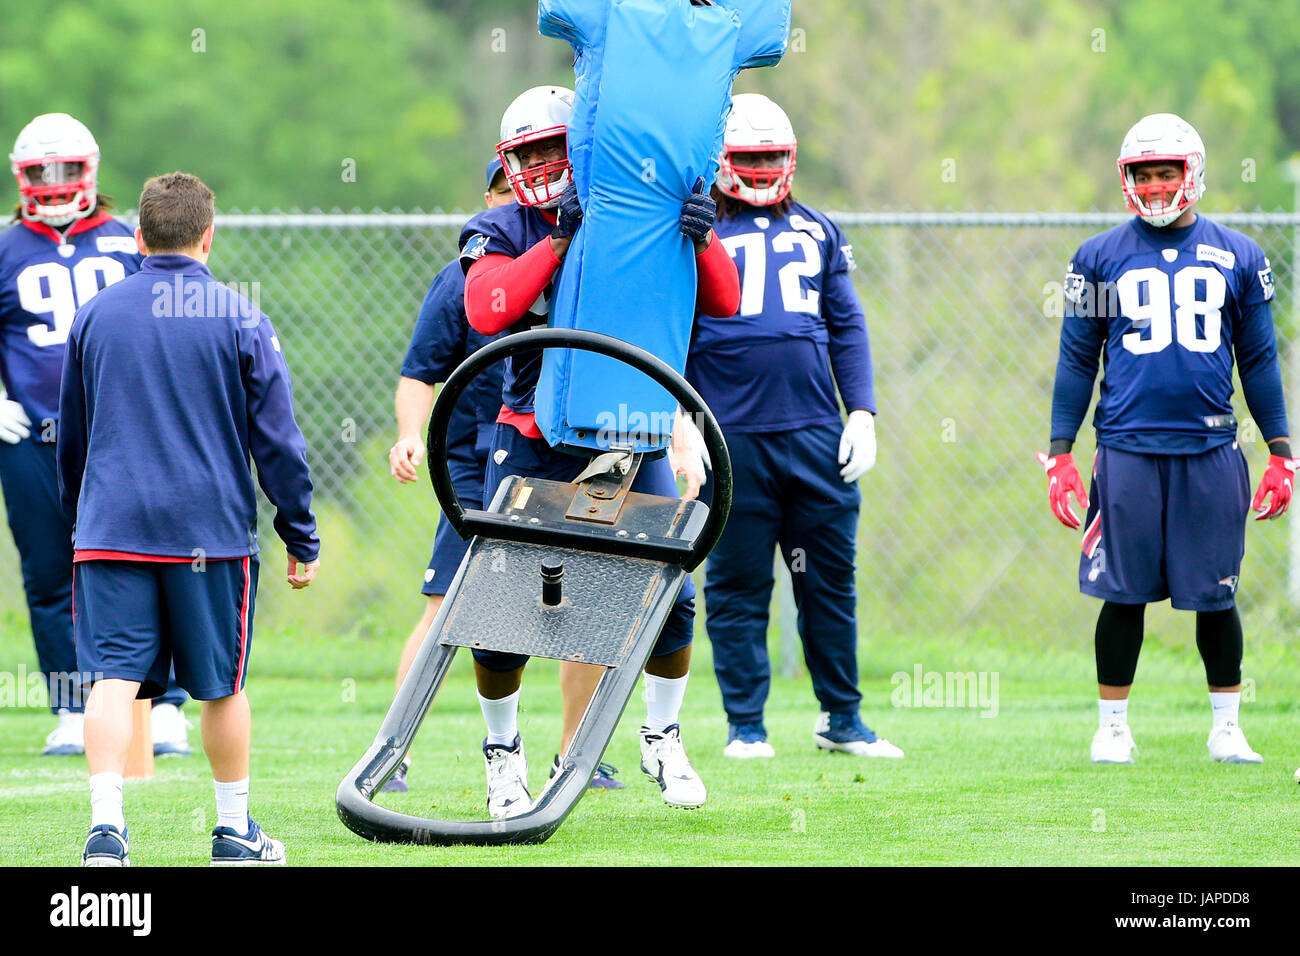 Foxborough, Massachusetts, USA. 7th June, 2017. New England Patriots defensive end Kony Ealy (94) works with a tackle dummy at the New England Patriots mini camp held on the practice field at Gillette Stadium, in Foxborough, Massachusetts. Eric Canha/CSM/Alamy Live News Stock Photo